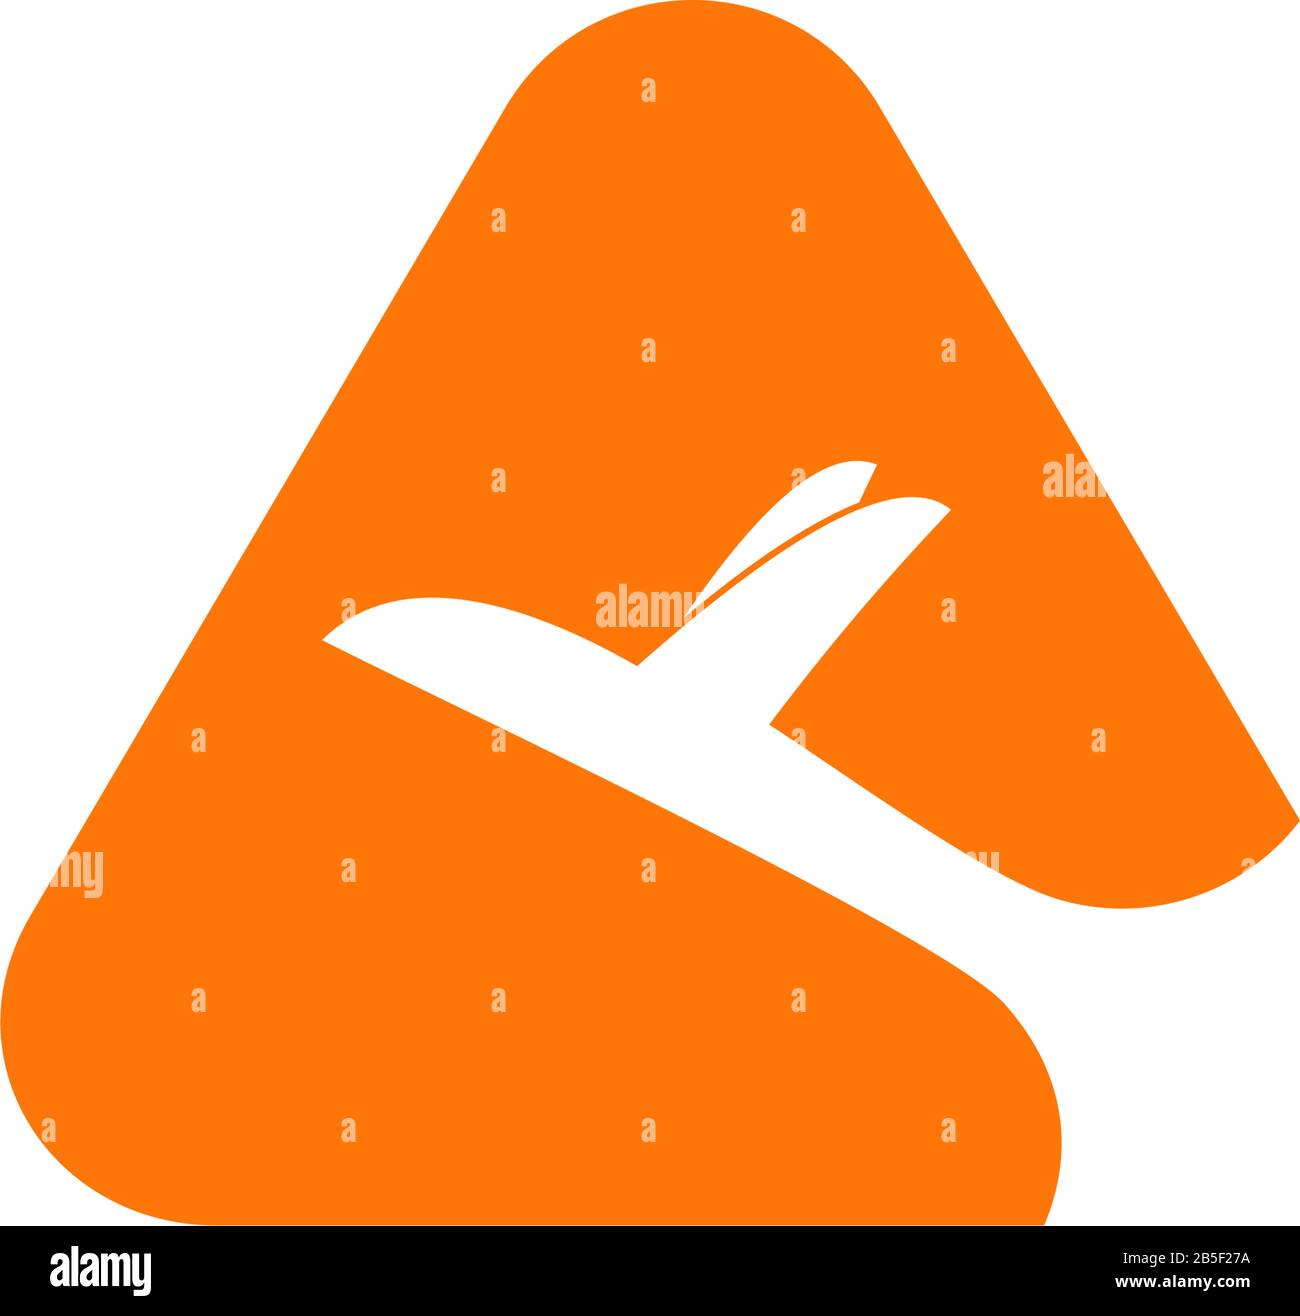 triangle swoosh airplane fly motion symbol logo vector Stock Vector ...